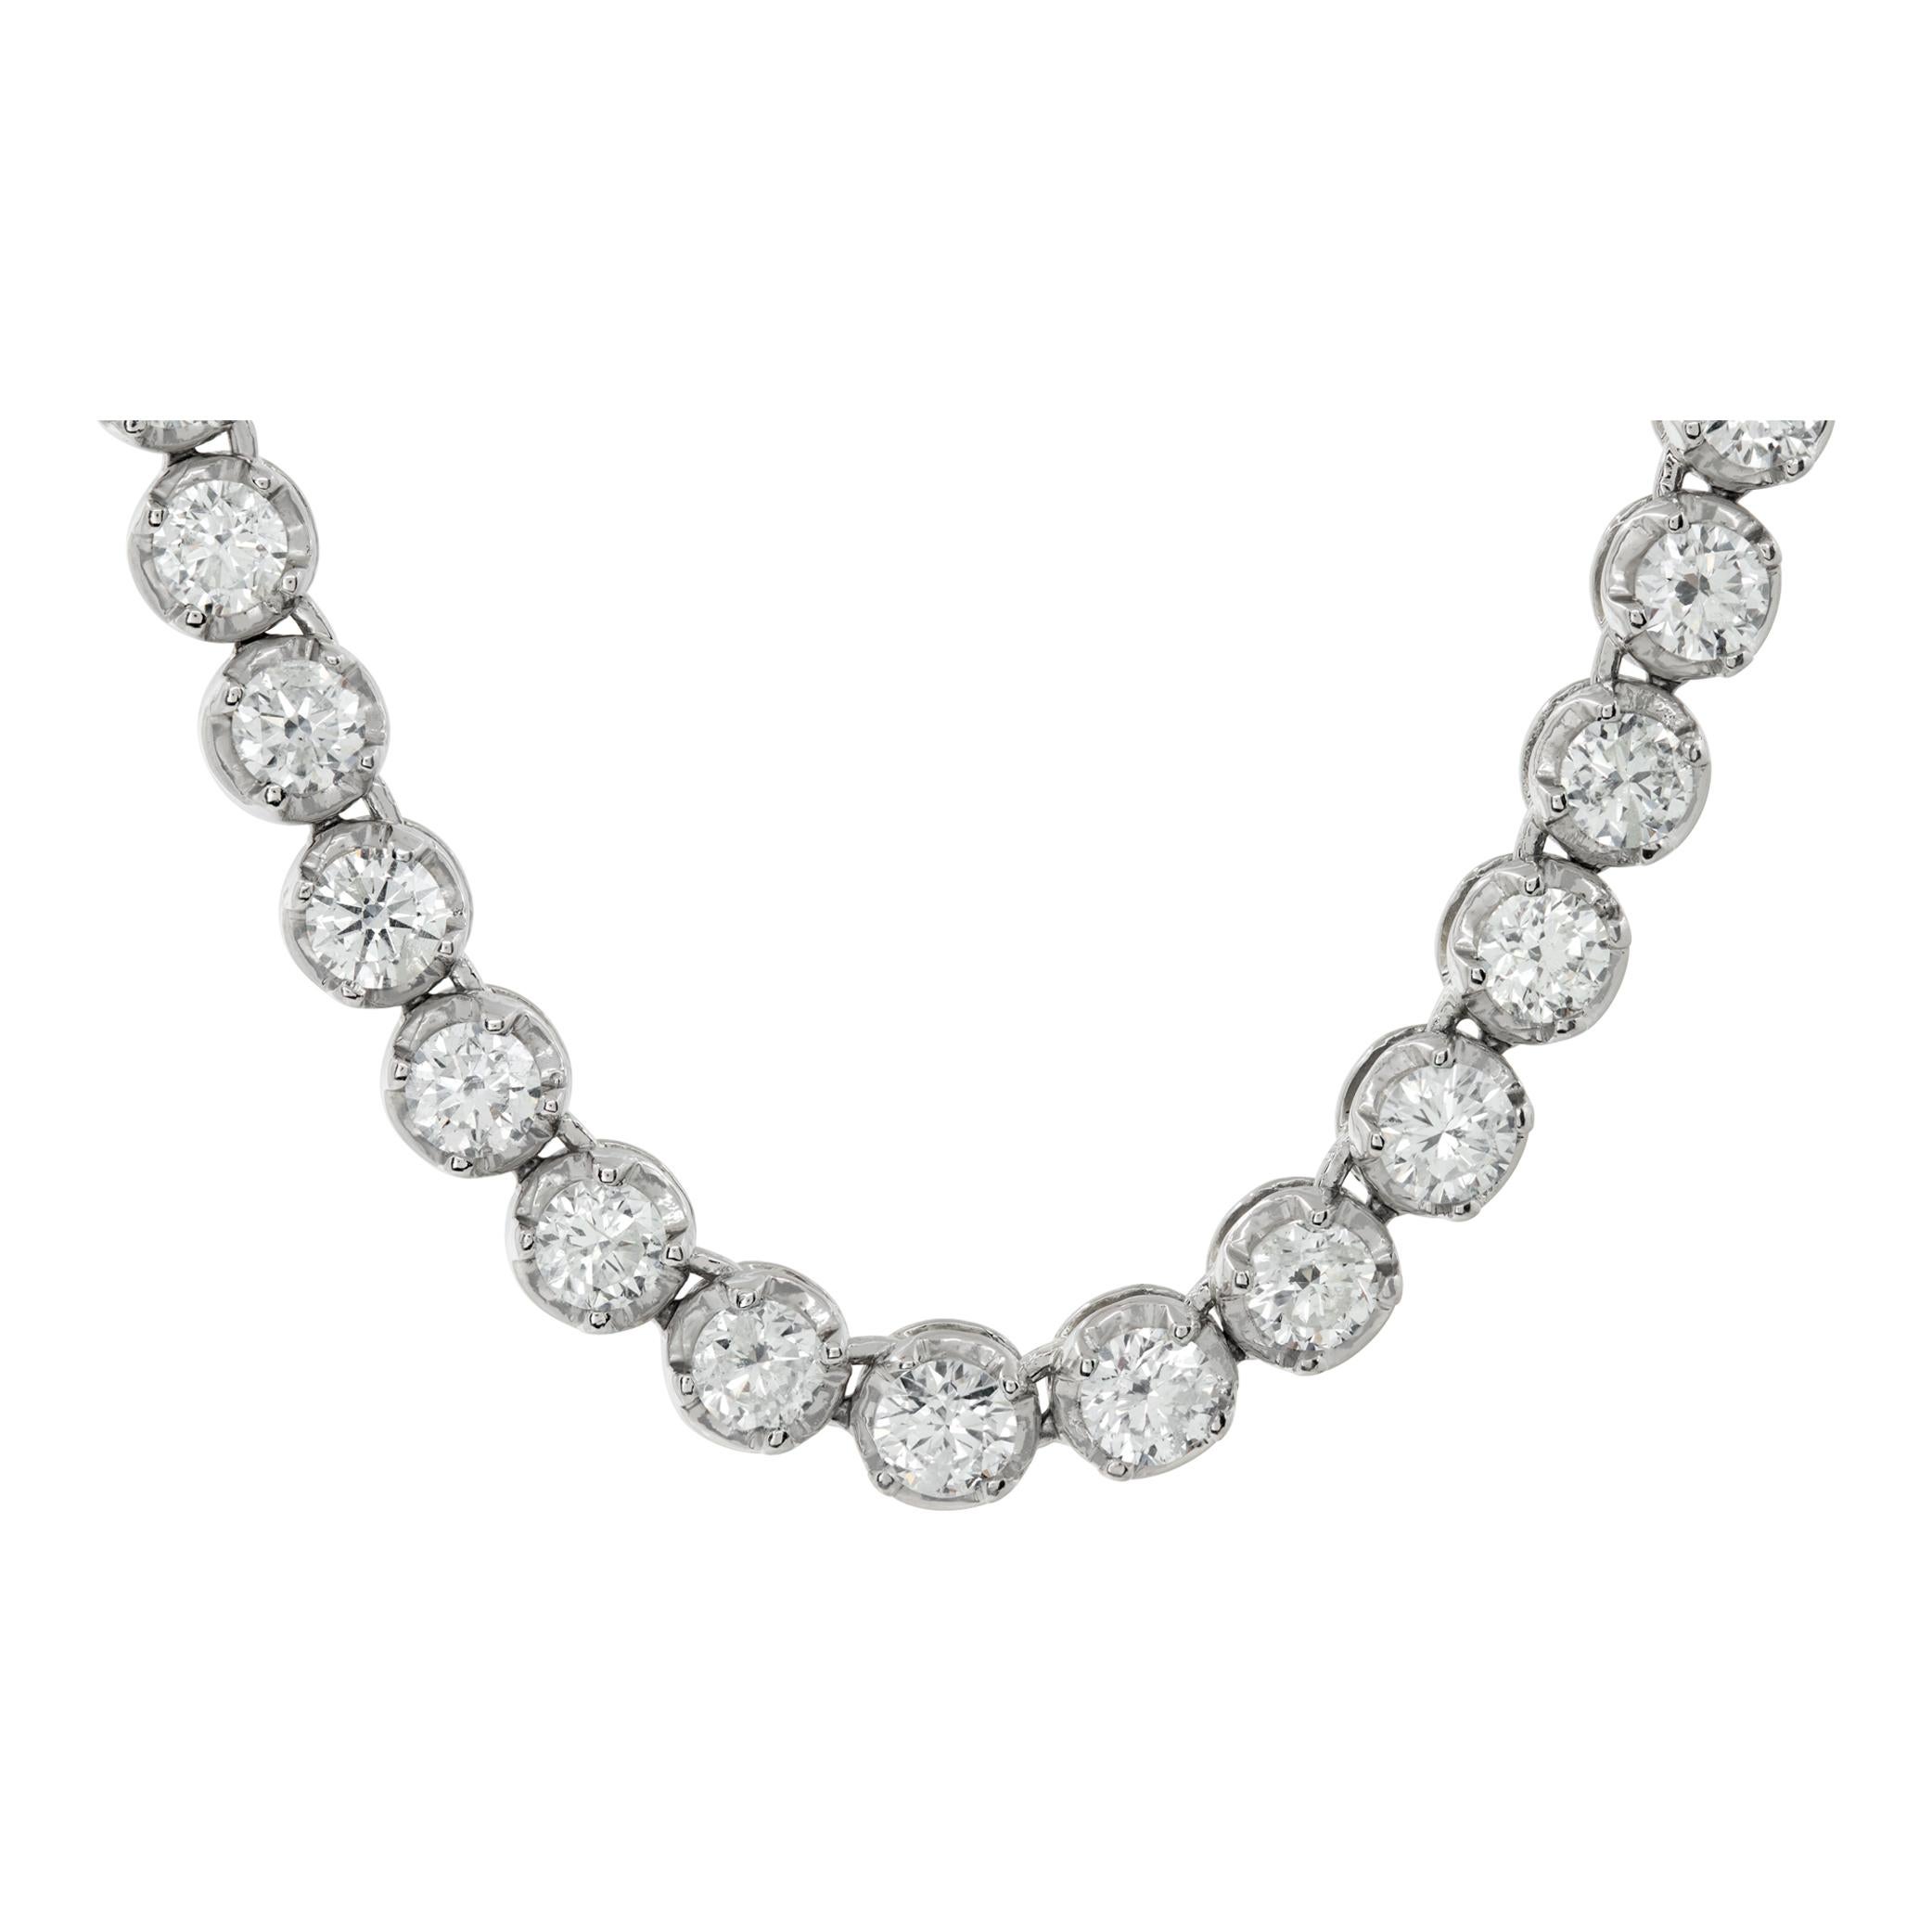 Riviera Diamonds necklace with approx. 30.19 carats round brilliant cut diamonds set in platinum. Diamonds estimate: H-I color, SI-I clarity.Total diamonds: 45 approx. 0.40 carat each. Lenght 20 inches,width 6.4 mm.
